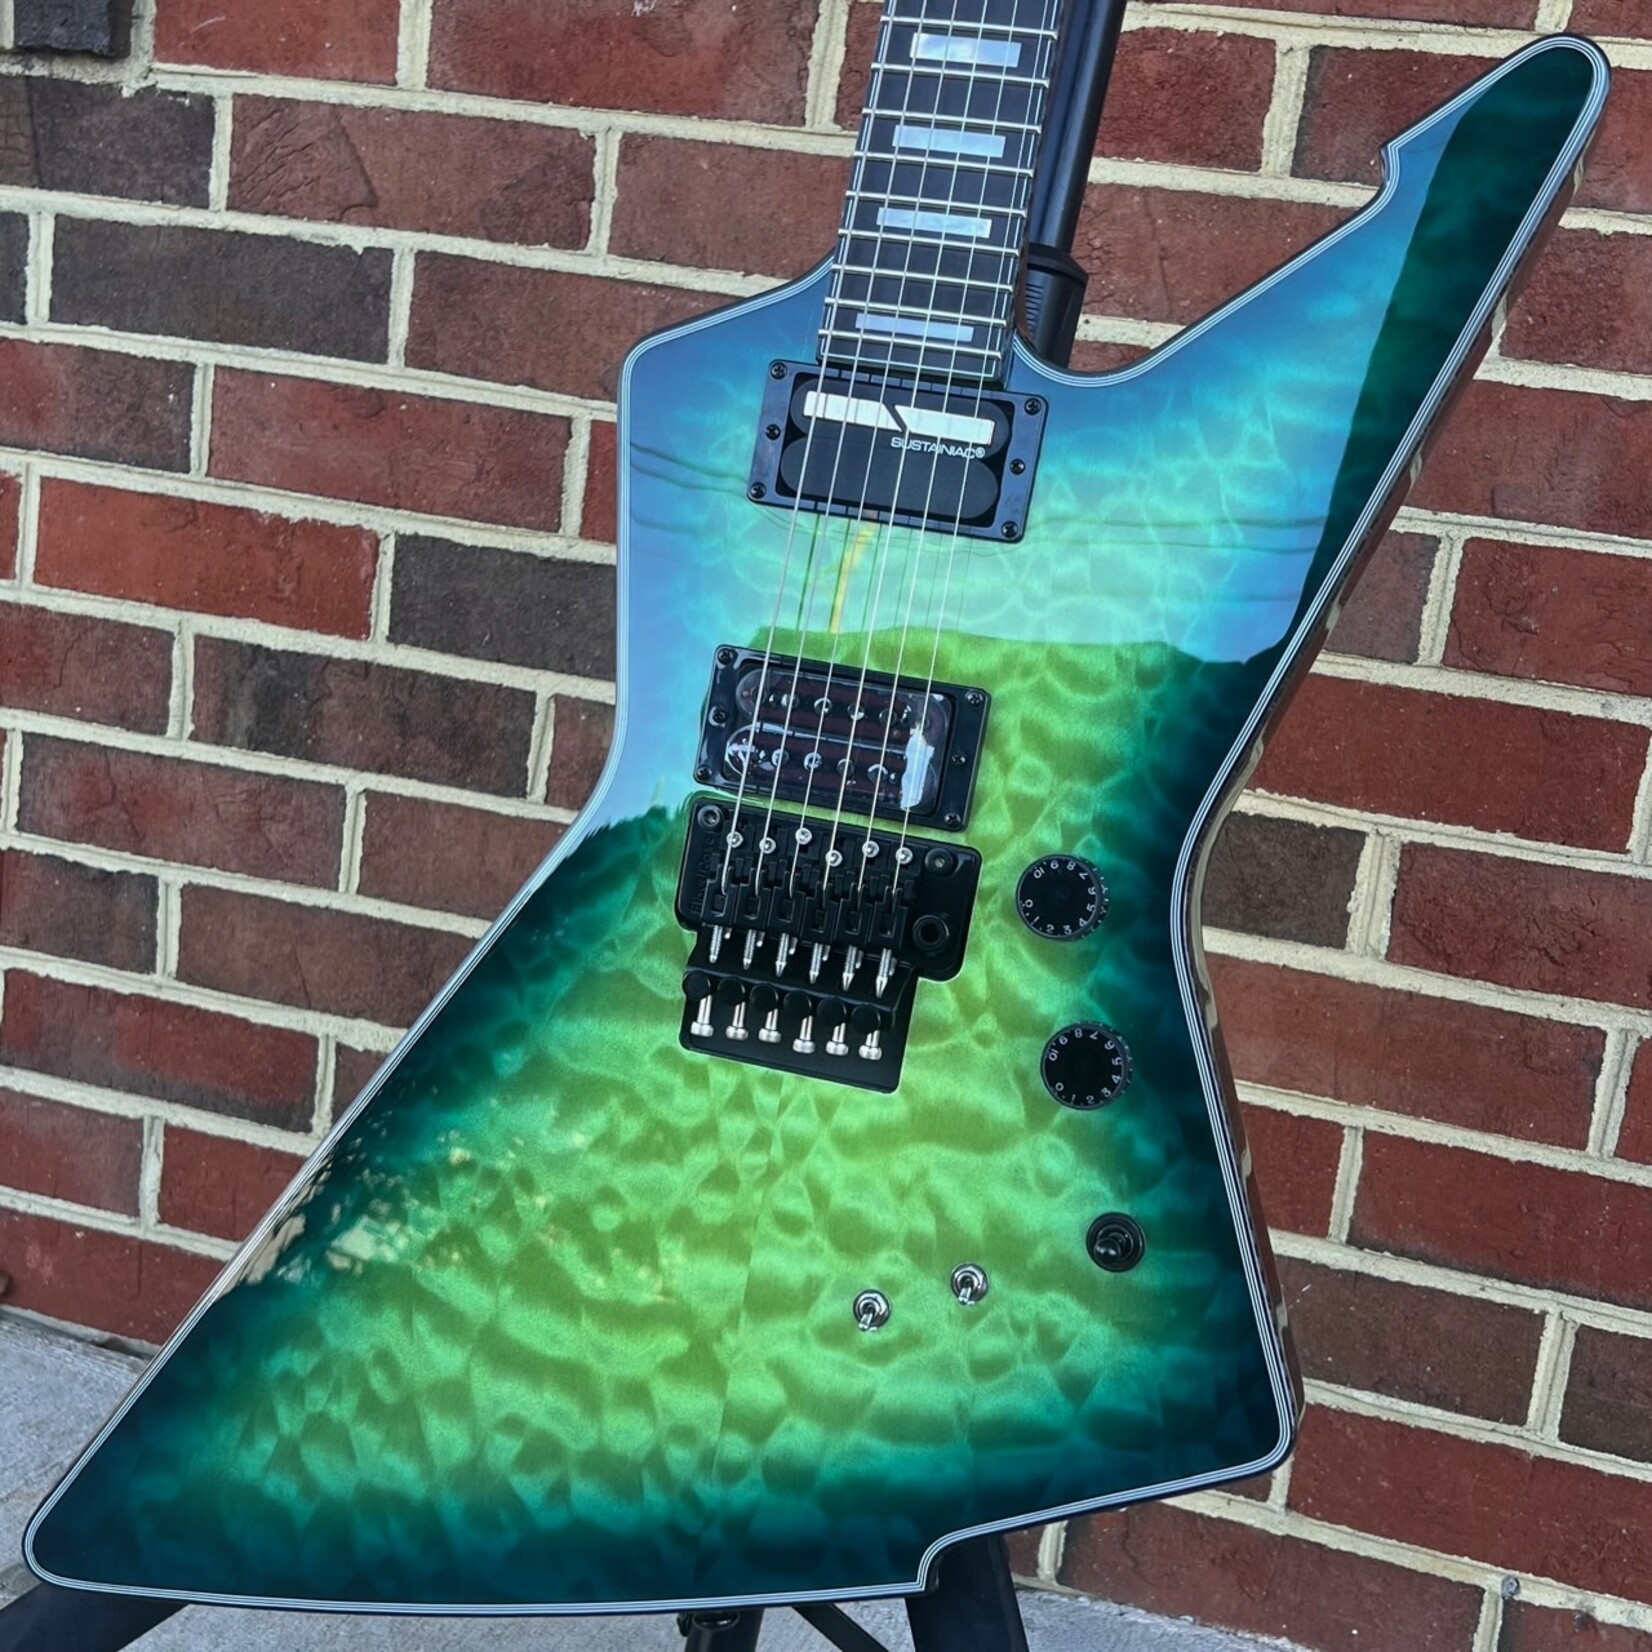 Schecter Guitar Research Schecter E-1 FR S Special Edition, Green Burst, Quilted Maple Top, Sustainiac Pickup, Floyd Rose Tremolo, SN# W23101765